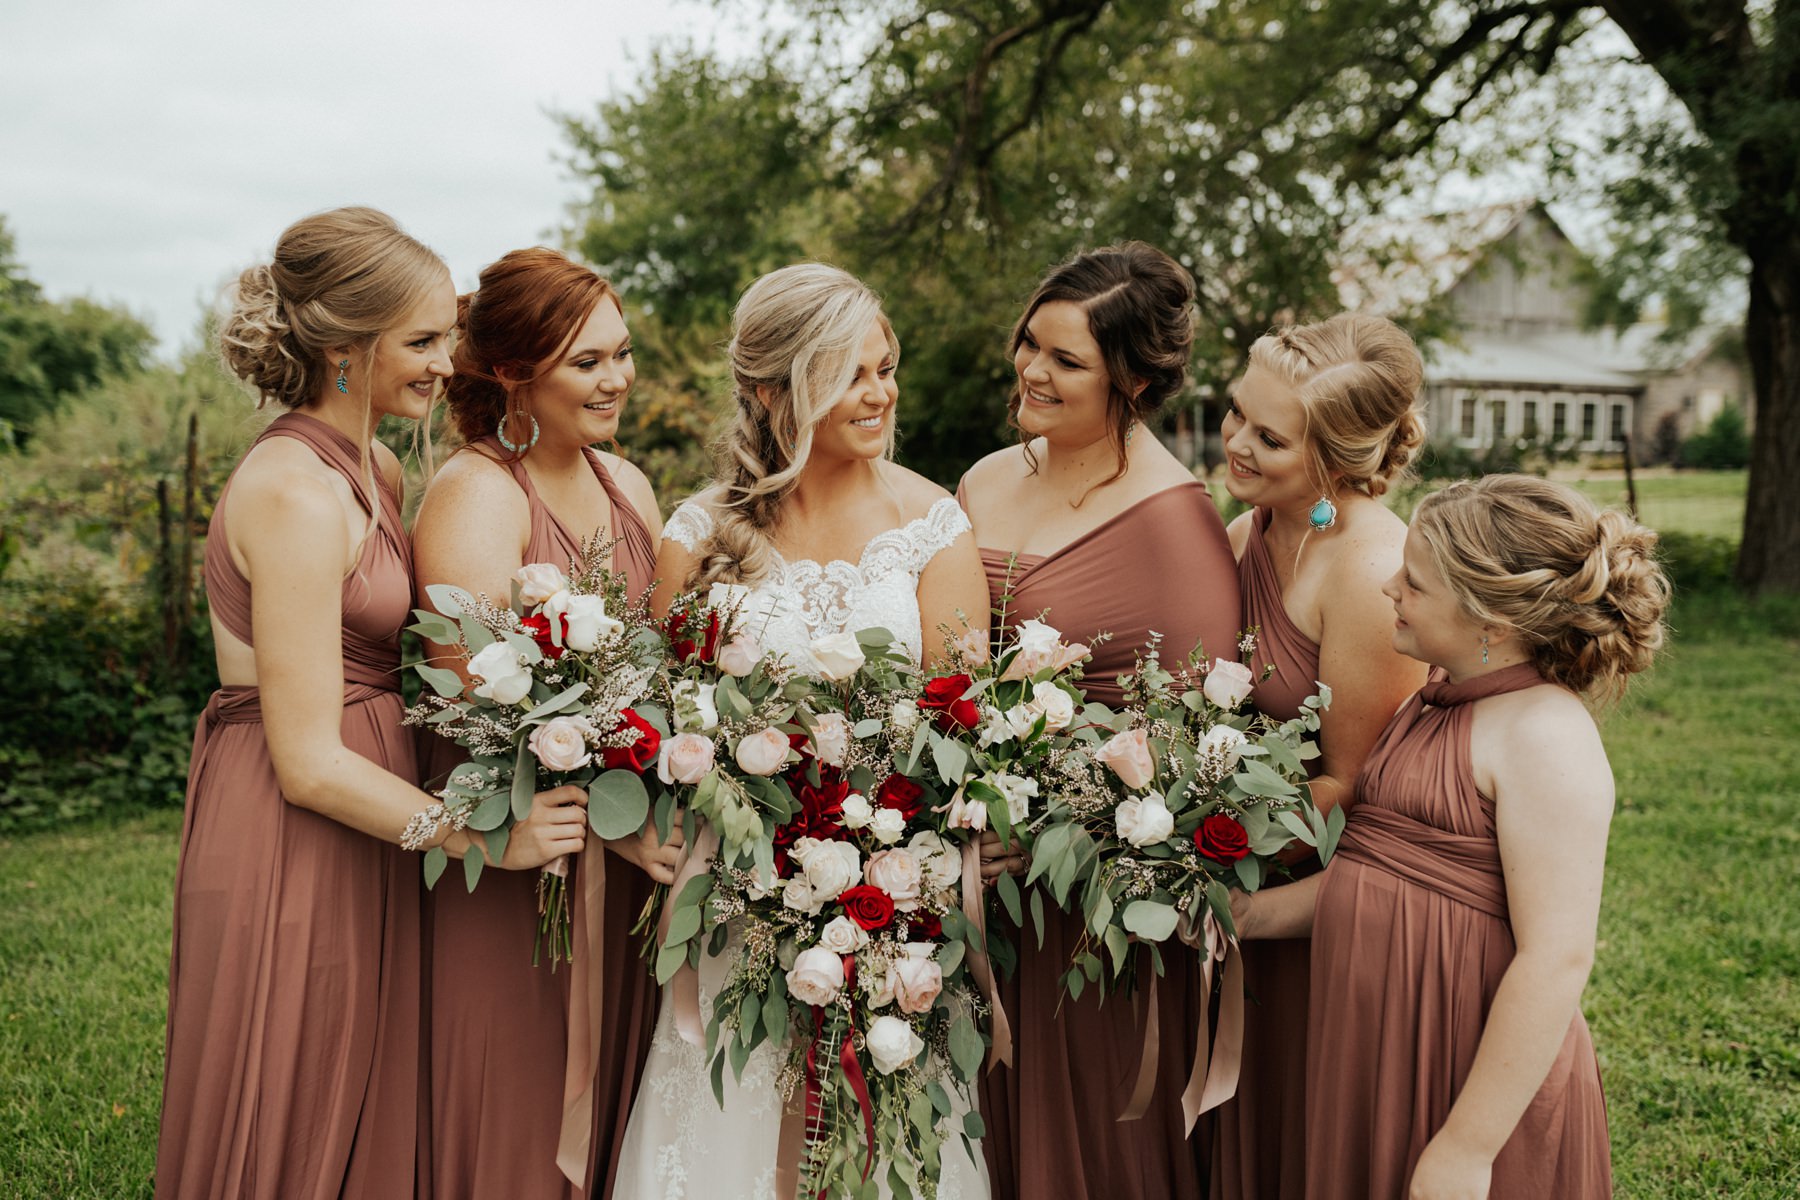 A bride and bridesmaids at The Barn at Belamour in Springfield, MO.